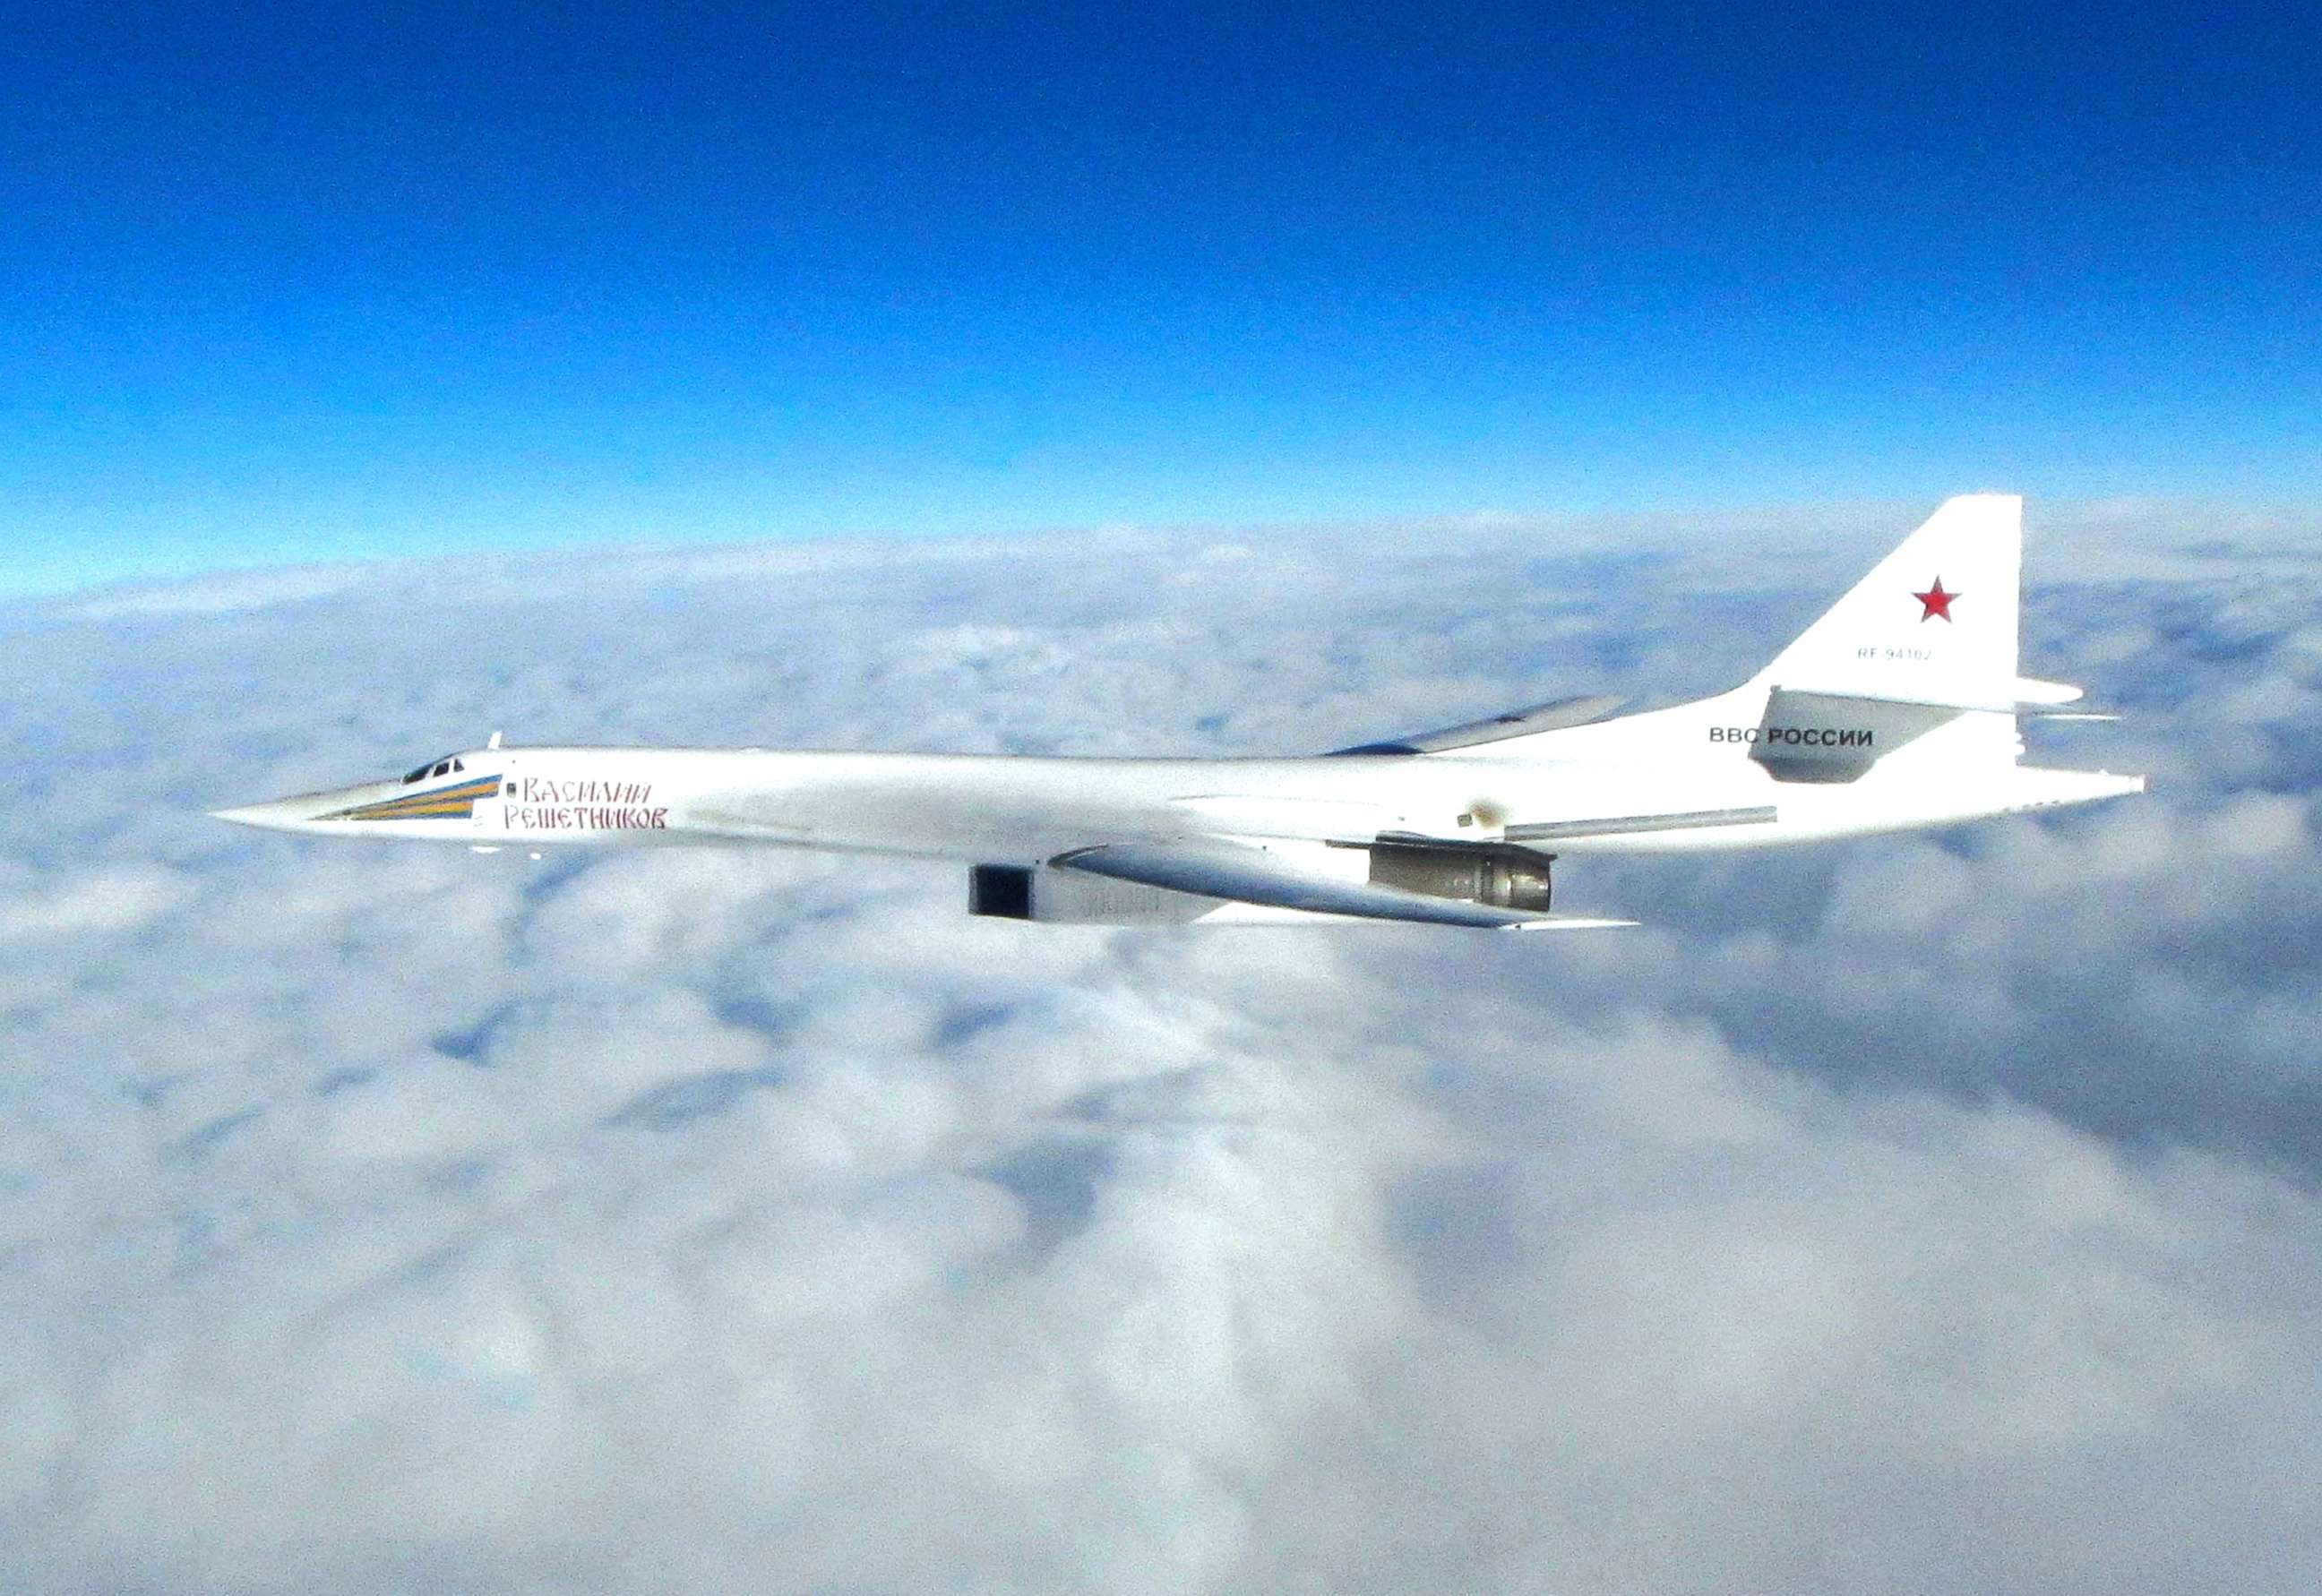 PHOTO: In this image made available by the Royal Air Force on  Jan. 15, 2018, one of Russian Blackjack Tupolev Tu-160 long-range bombers is photographed by an RAF aircraft, scrambled from RAF Lossiemouth, Scotland.